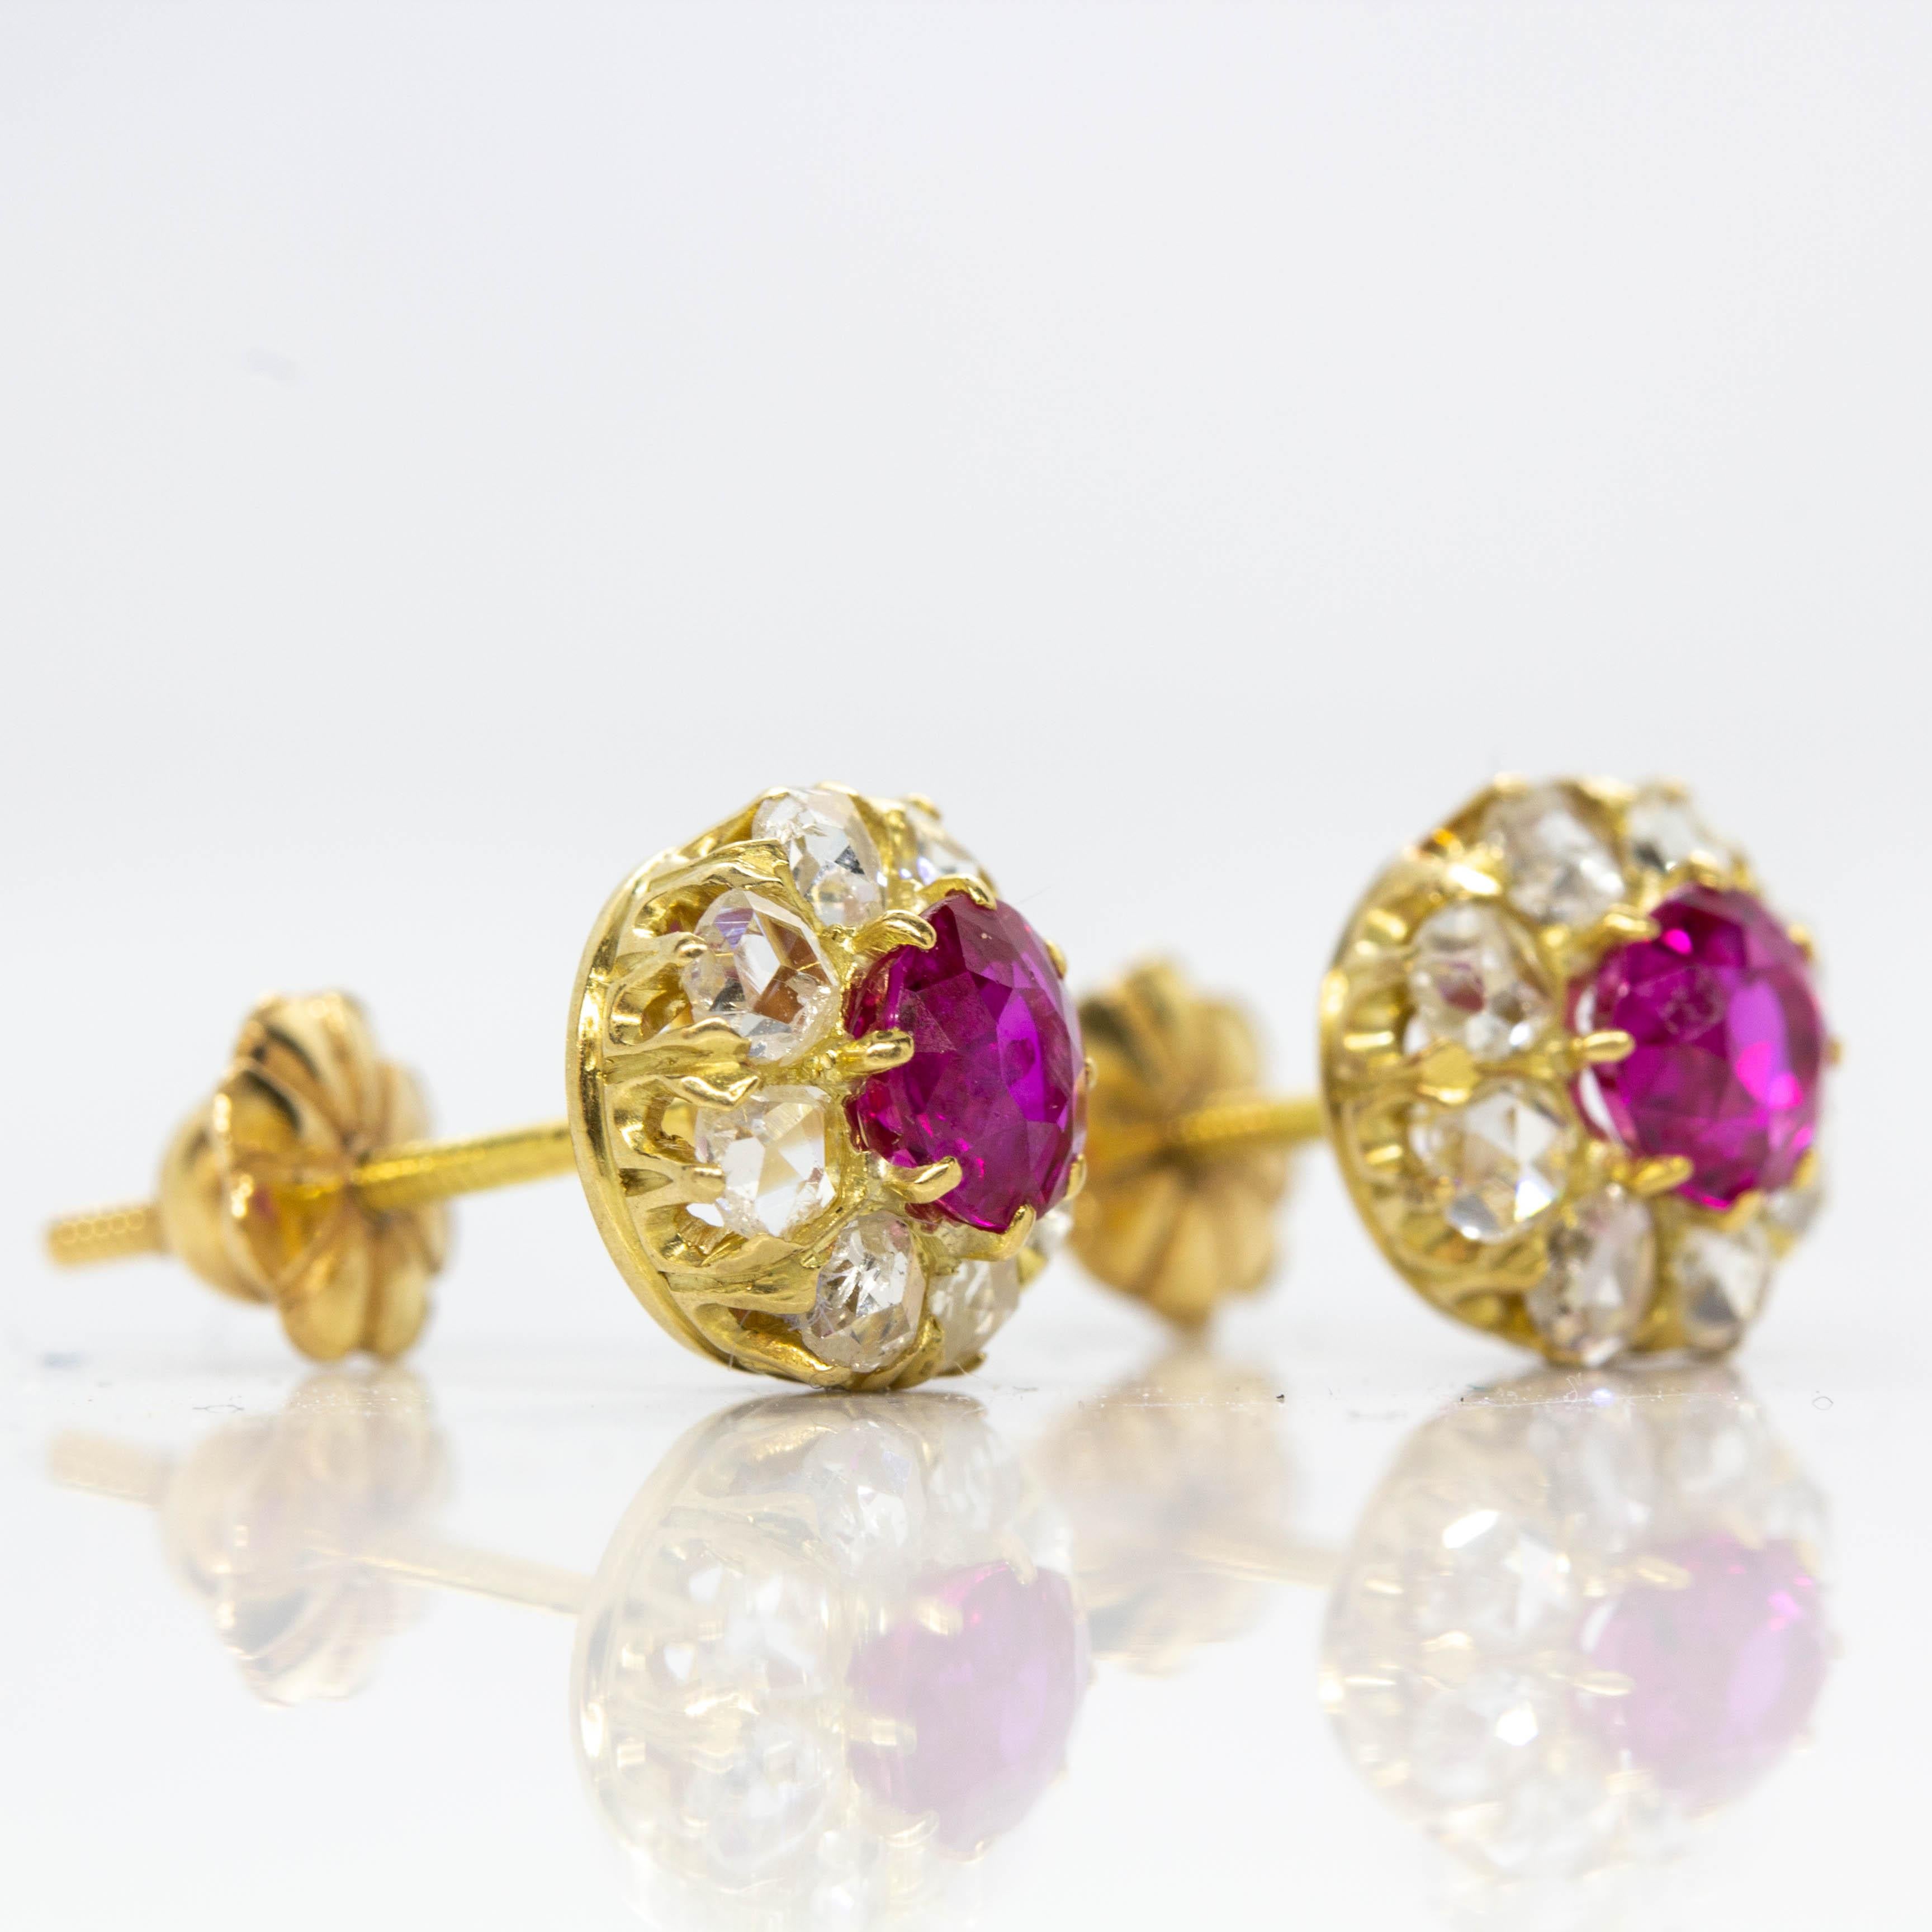 Period: Victorian (1836 - 1900)
Composition: 18k gold
•	2 natural Burma rubies 1ctw.
•	16 rose cut diamonds I-SI1 0.65ctw
Earrings measure: 7mm by 7mm by 5mm
Total weight: 2.5 grams – 1.5dwt
